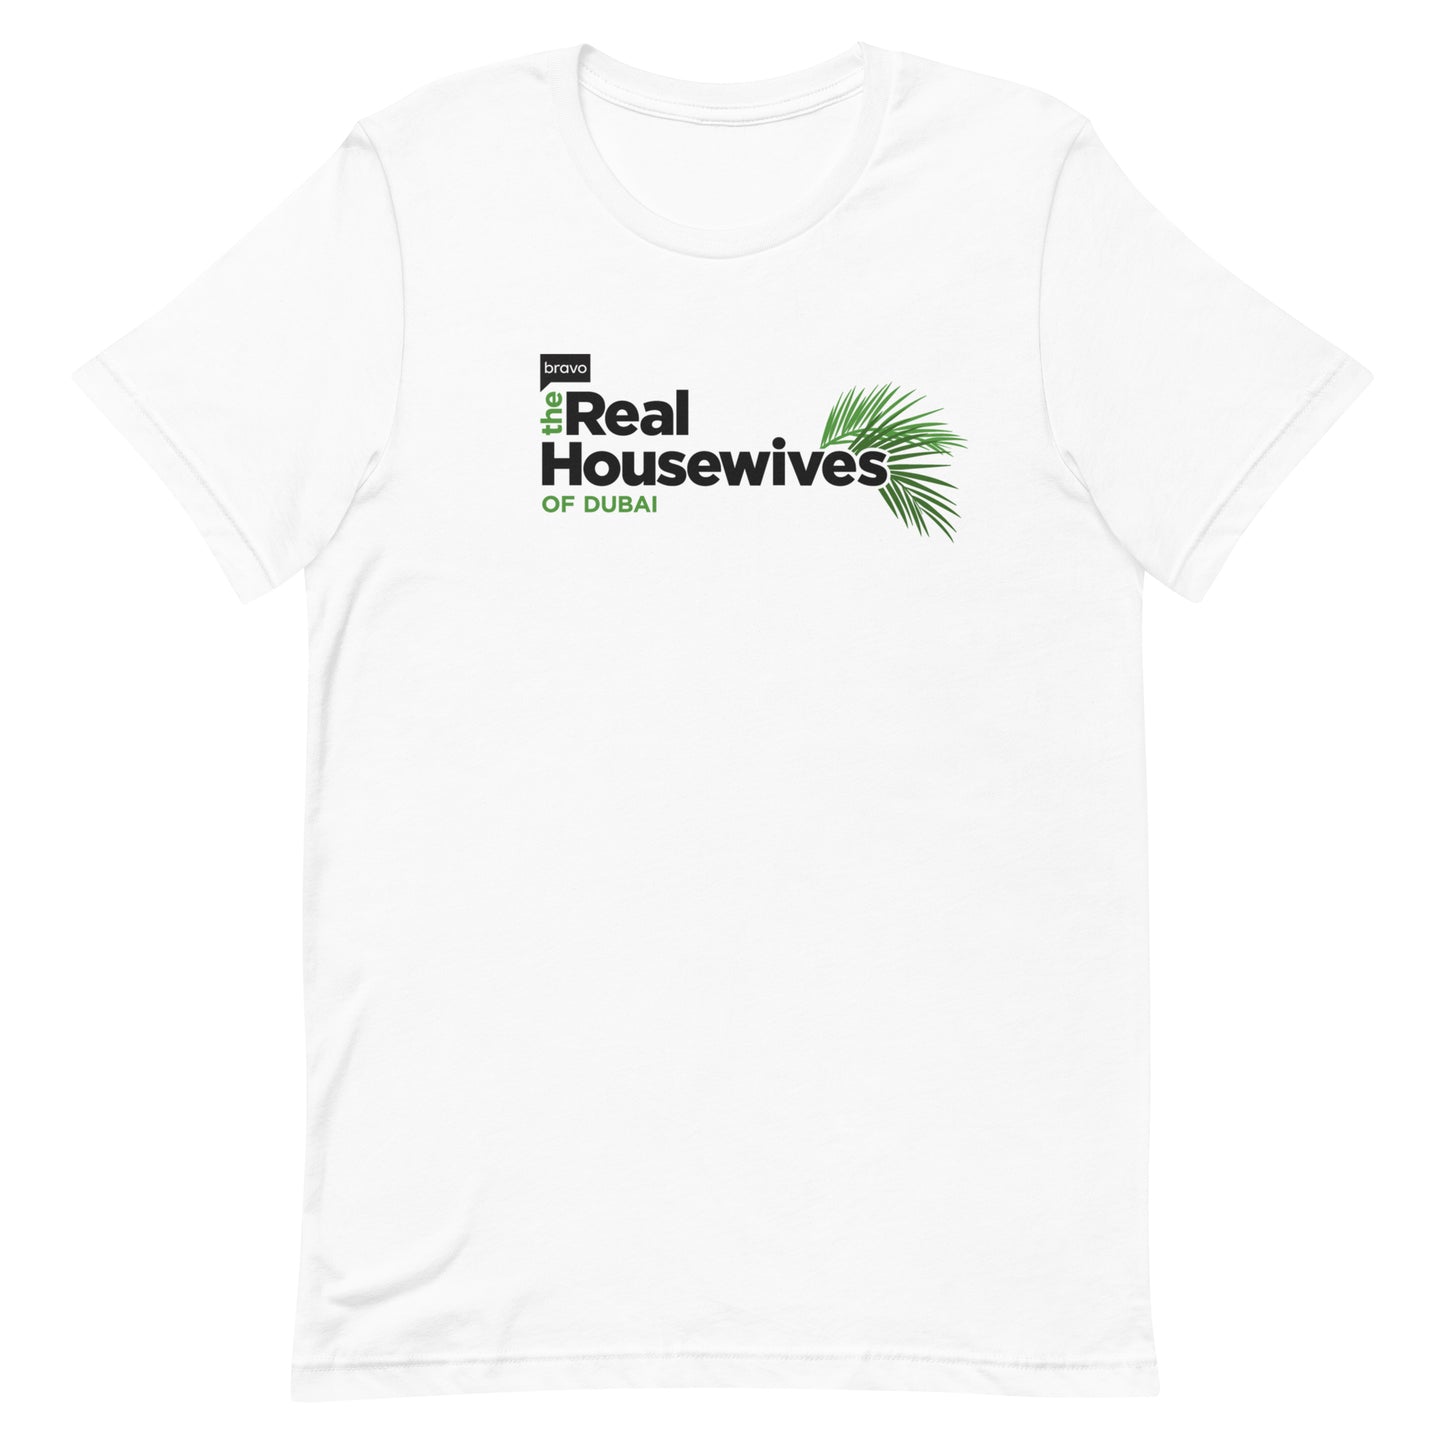 The Real Housewives of Dubai T-Shirt